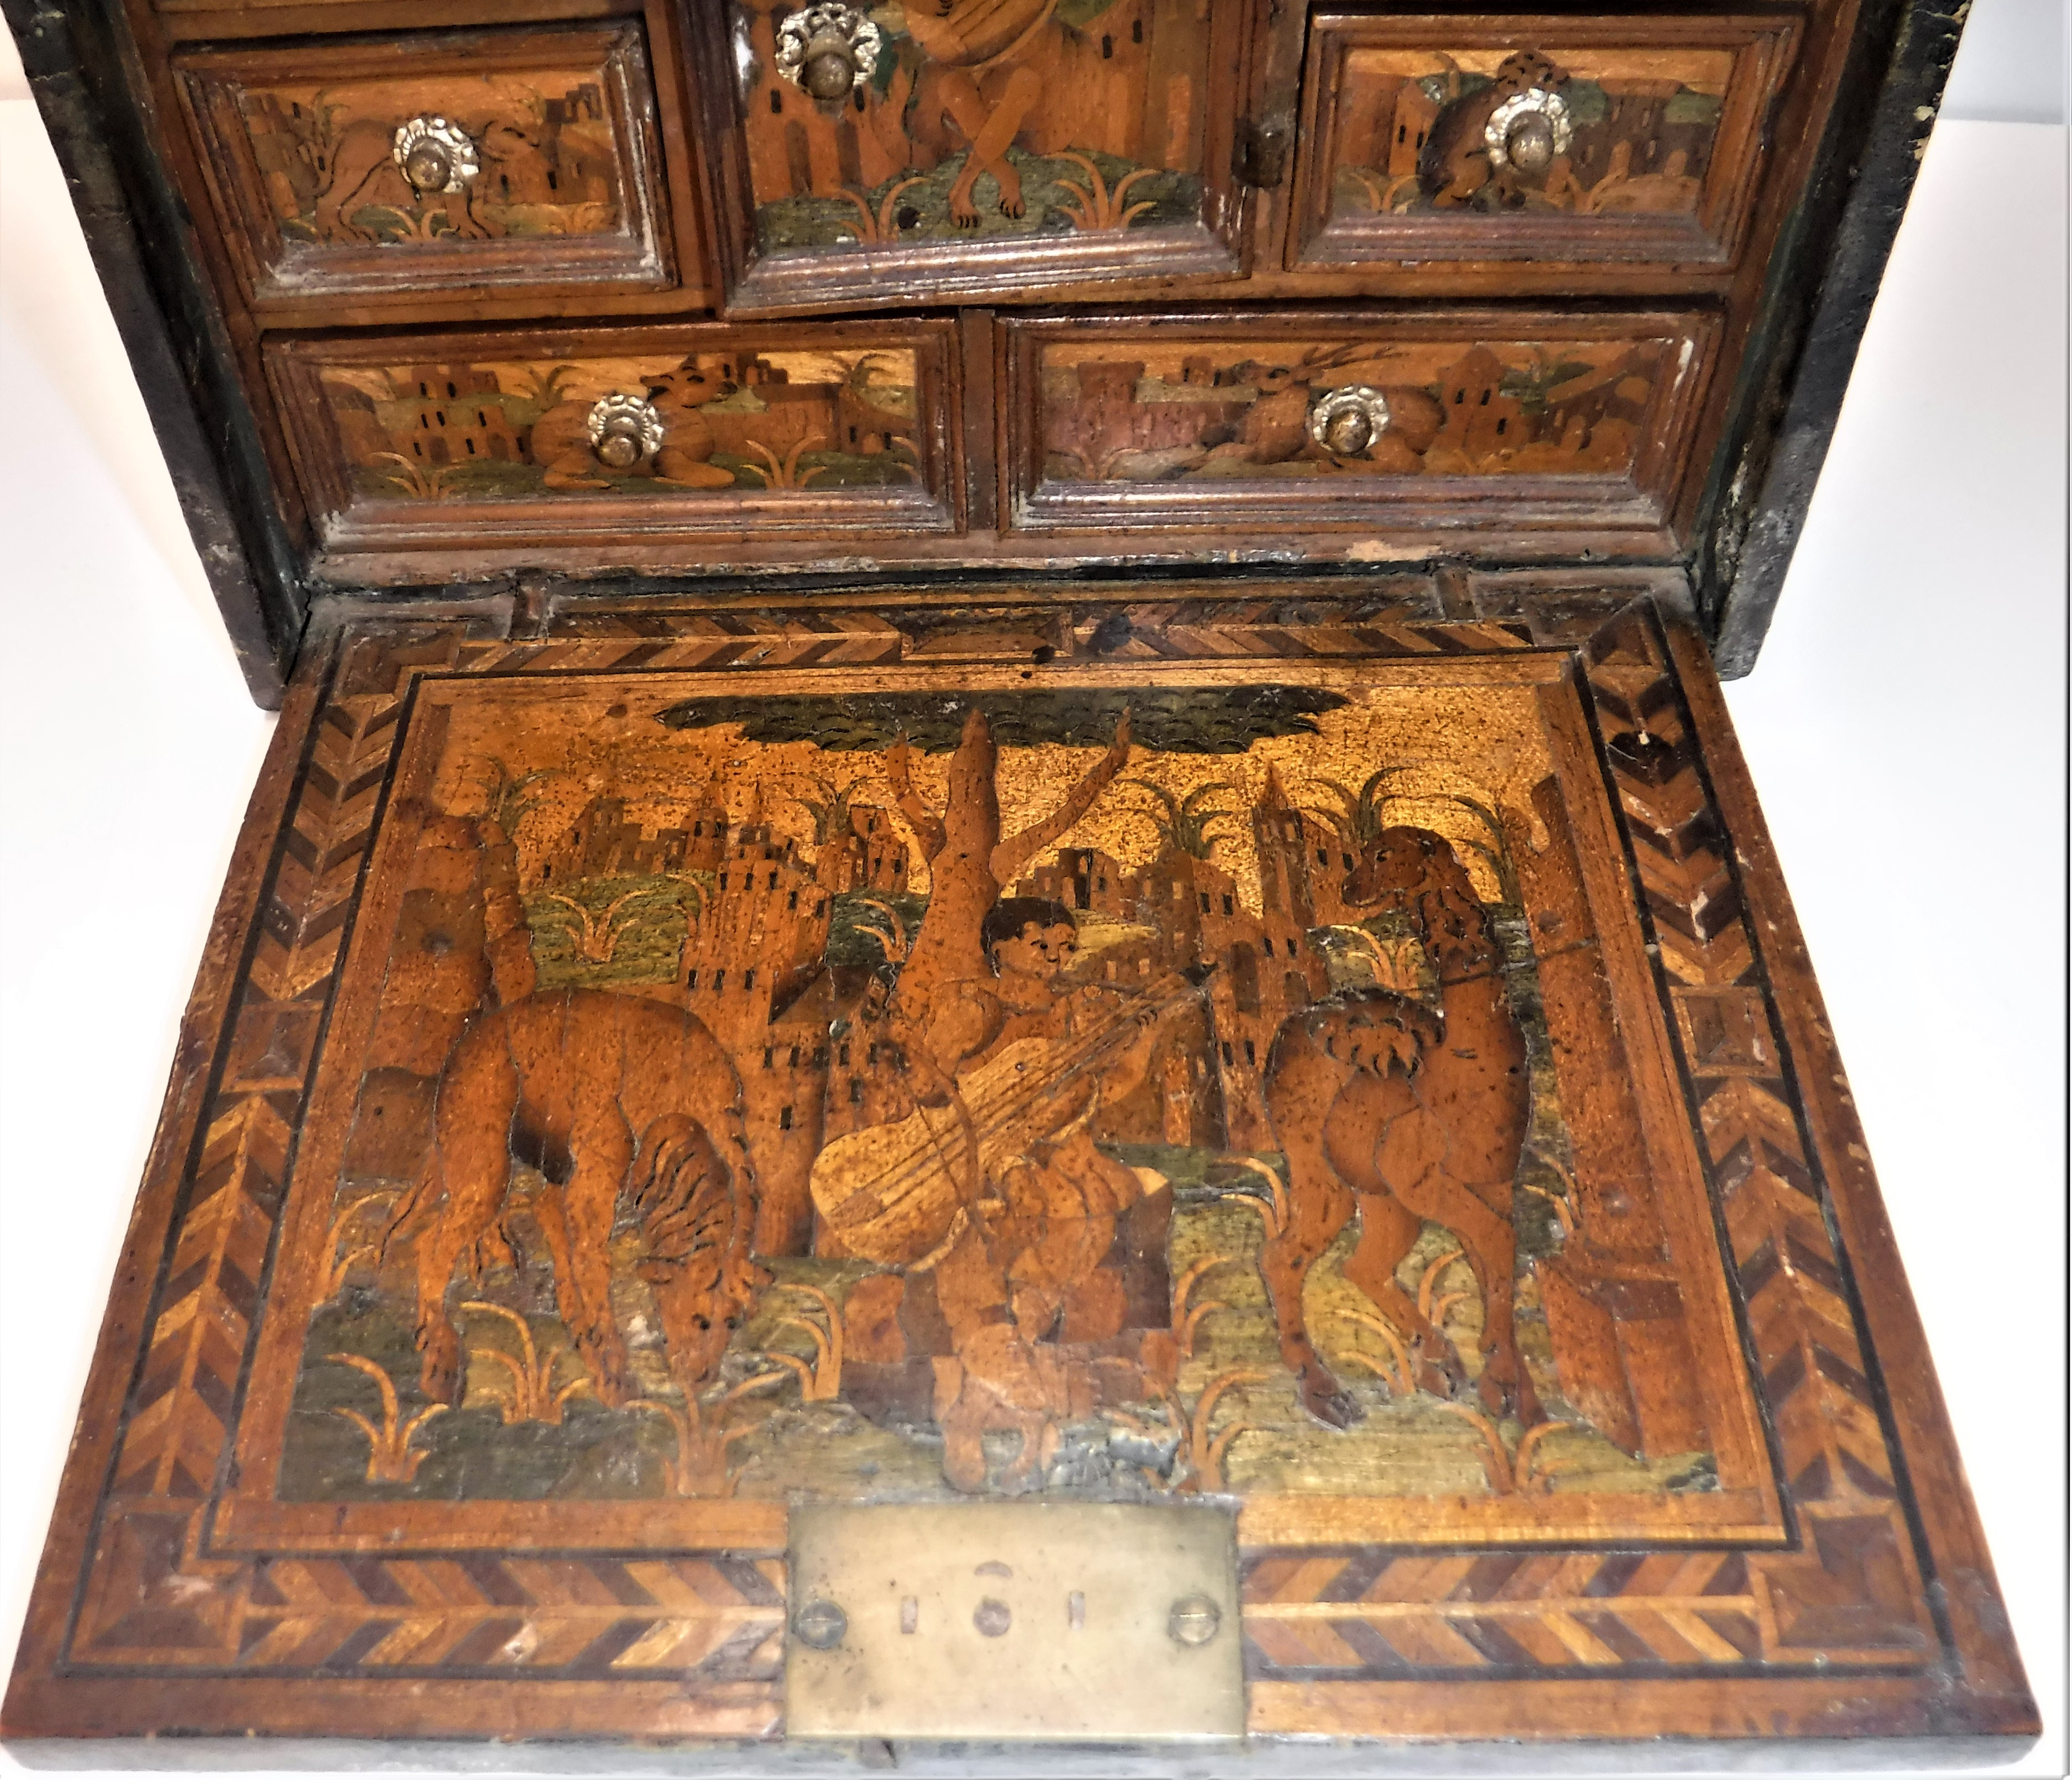 A 17th Century Augsburg table-top or tra - Image 8 of 42